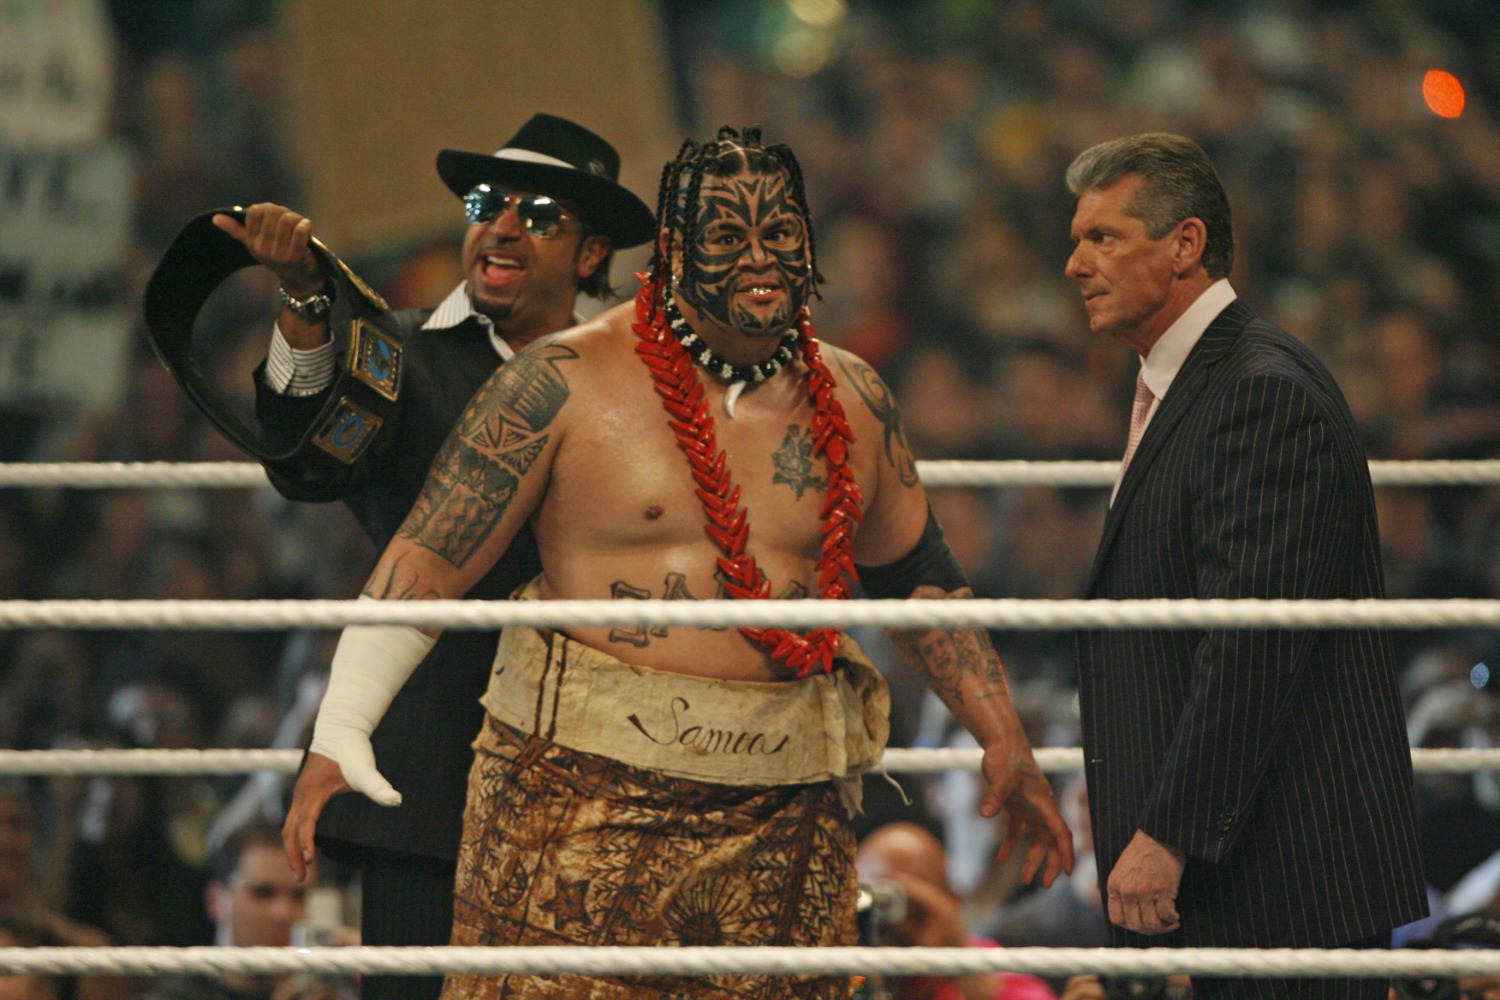 WWE superstar Umaga, who's real name was Edward Fatu, died in 2009 at the age of 36.